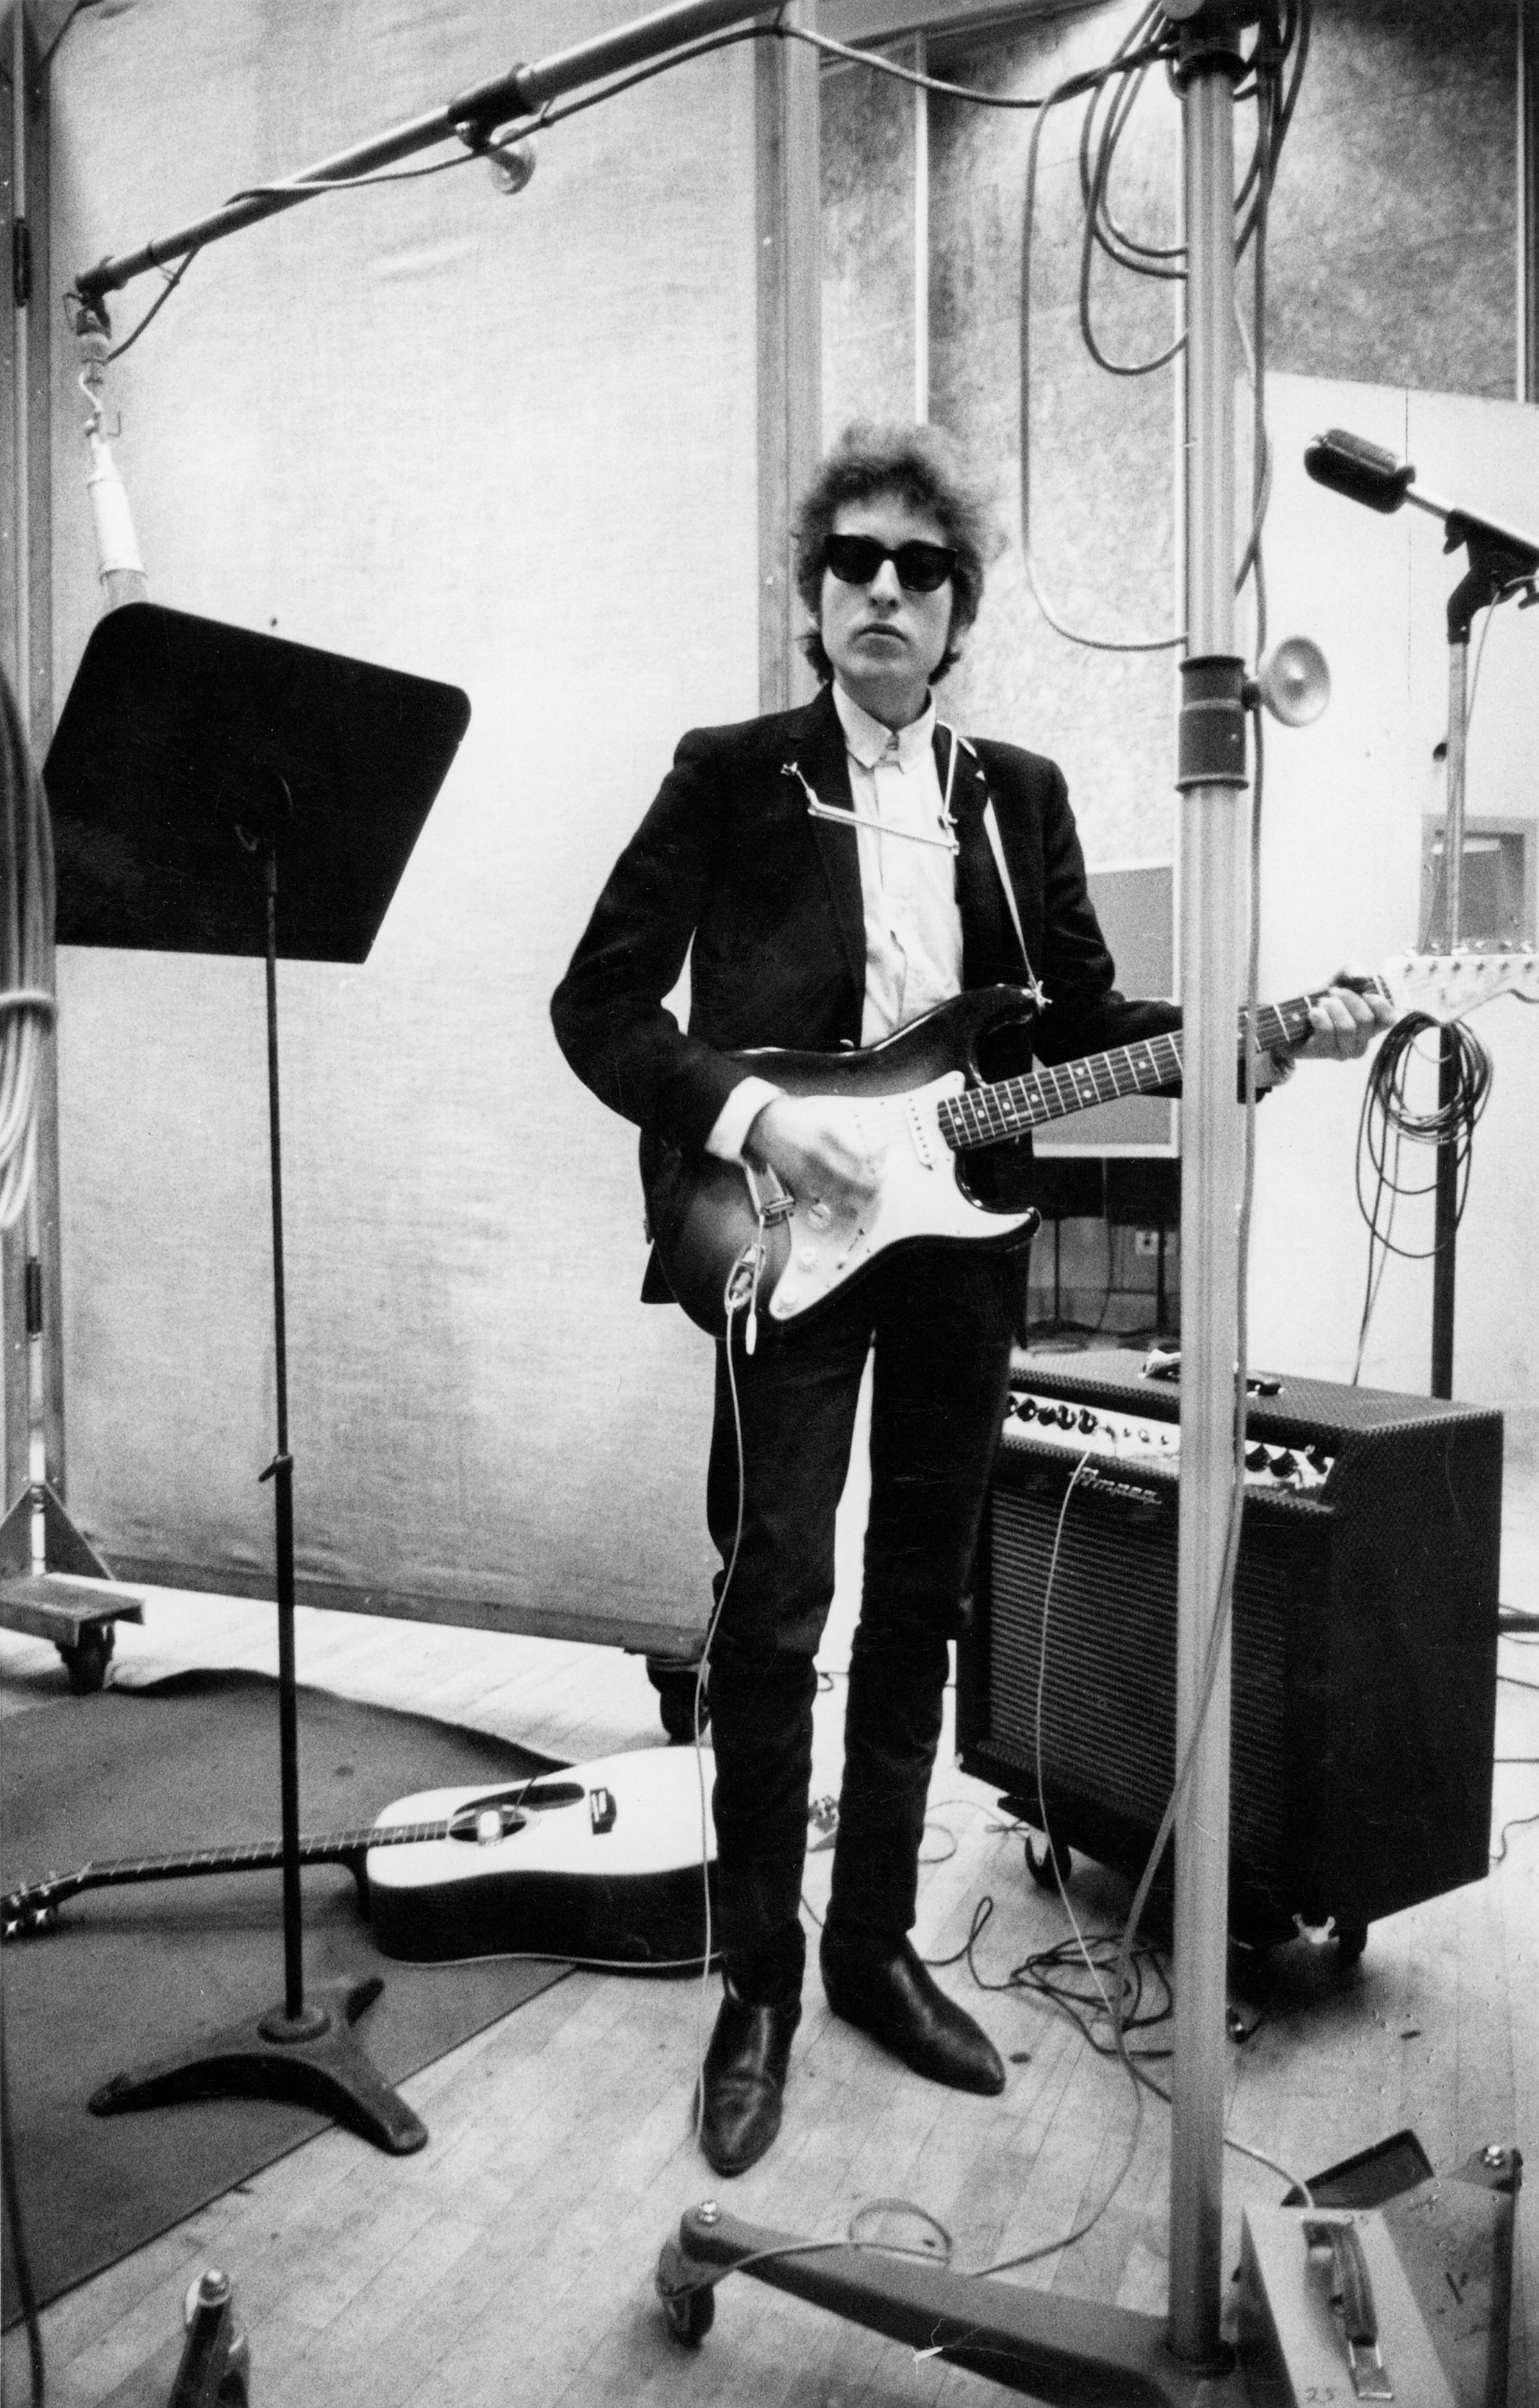 Bob in a studio with guitar, standing mic, and amp, wearing sunglasses, jacket, shirt, and straight pants